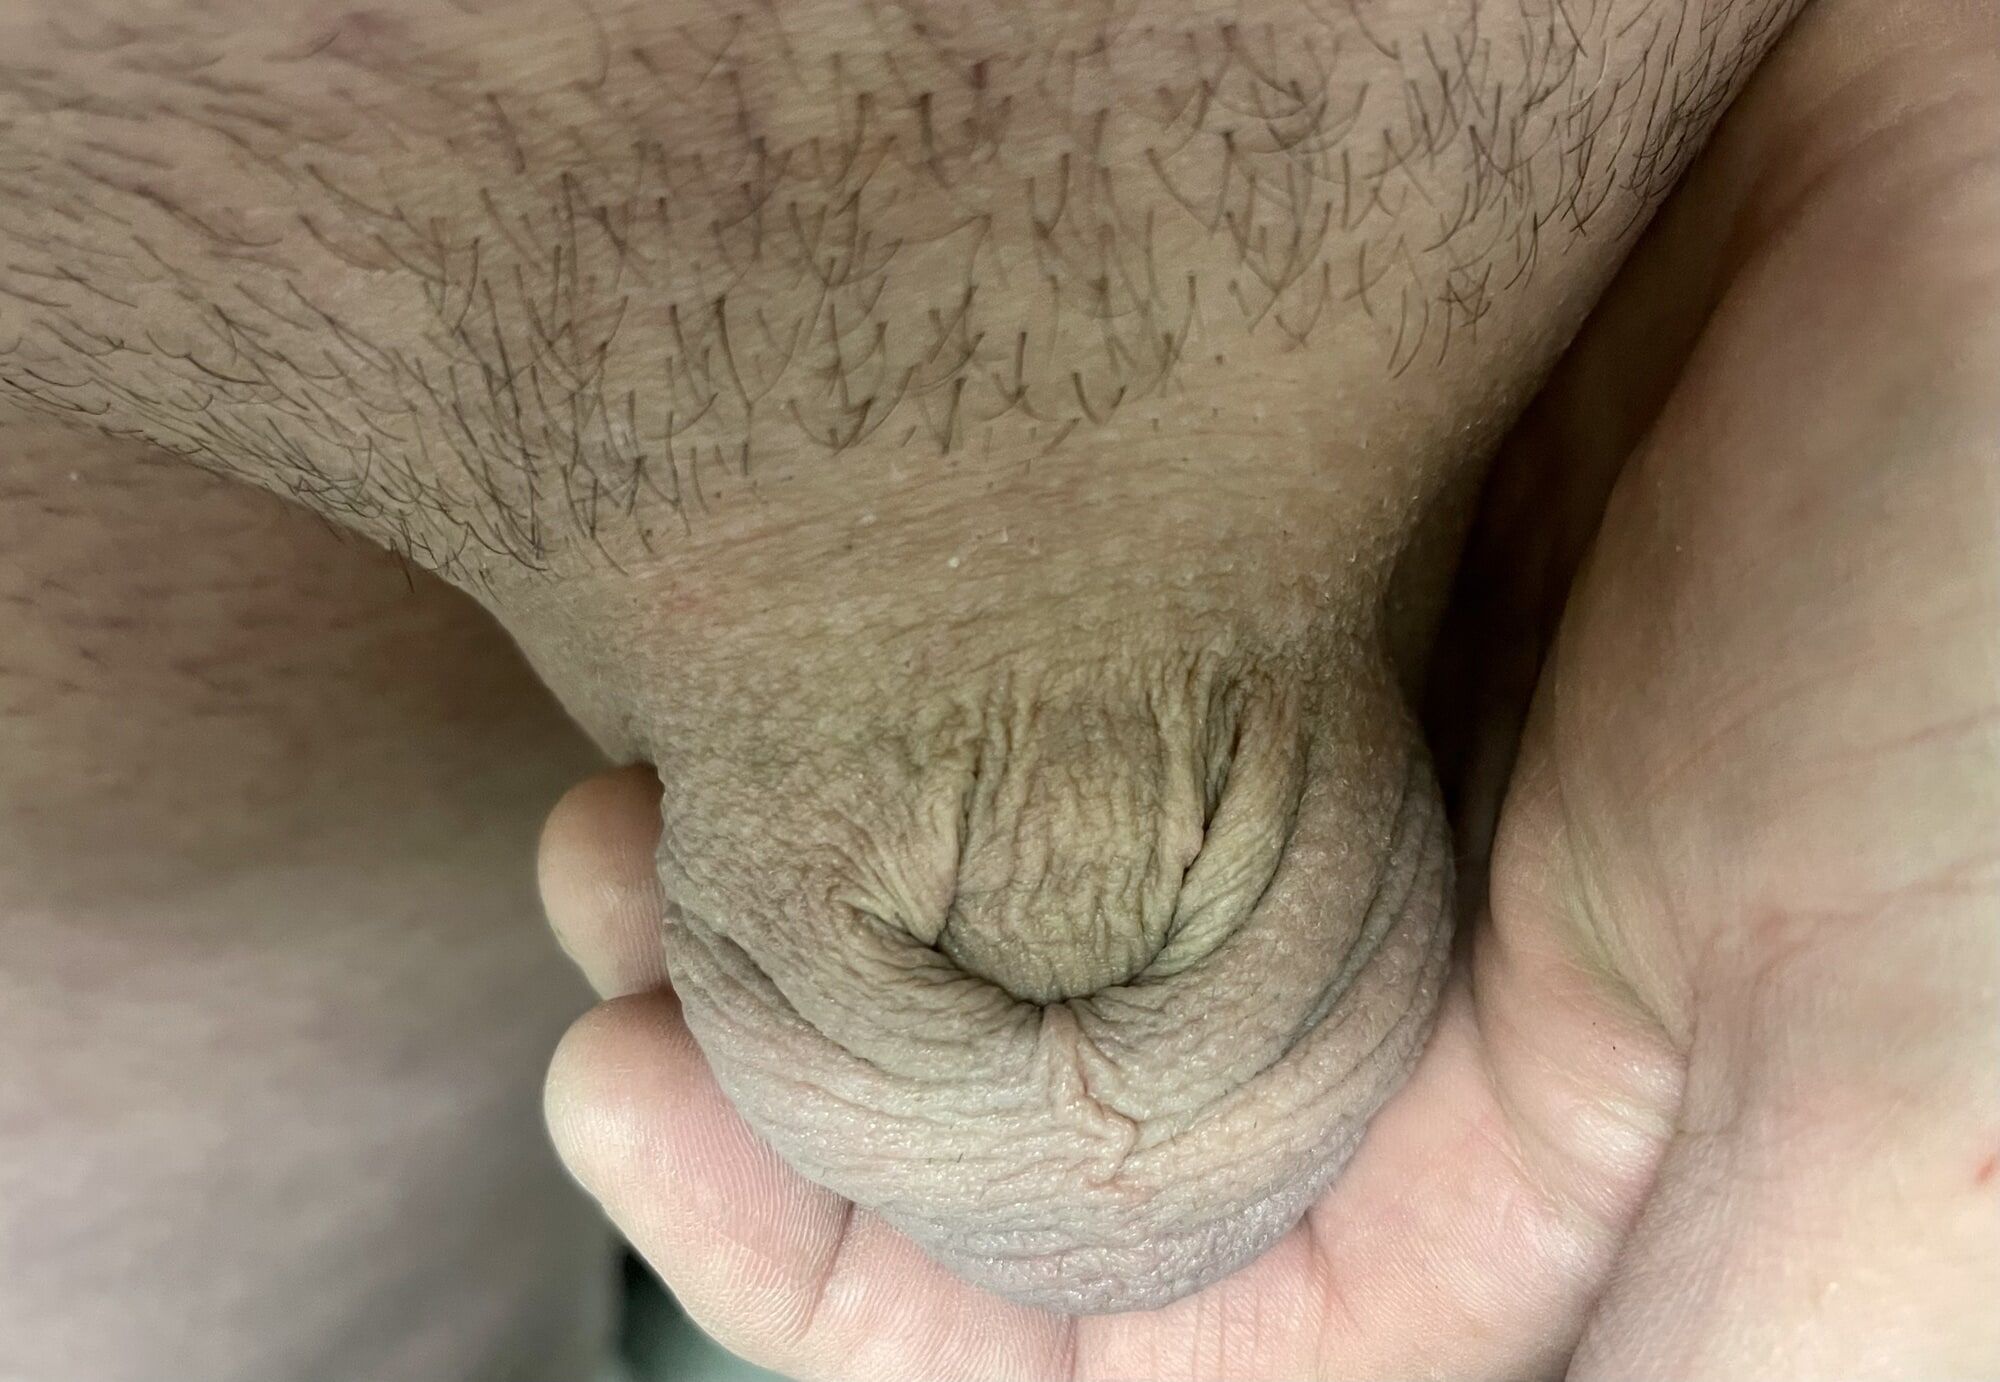 Me and my inverted cock